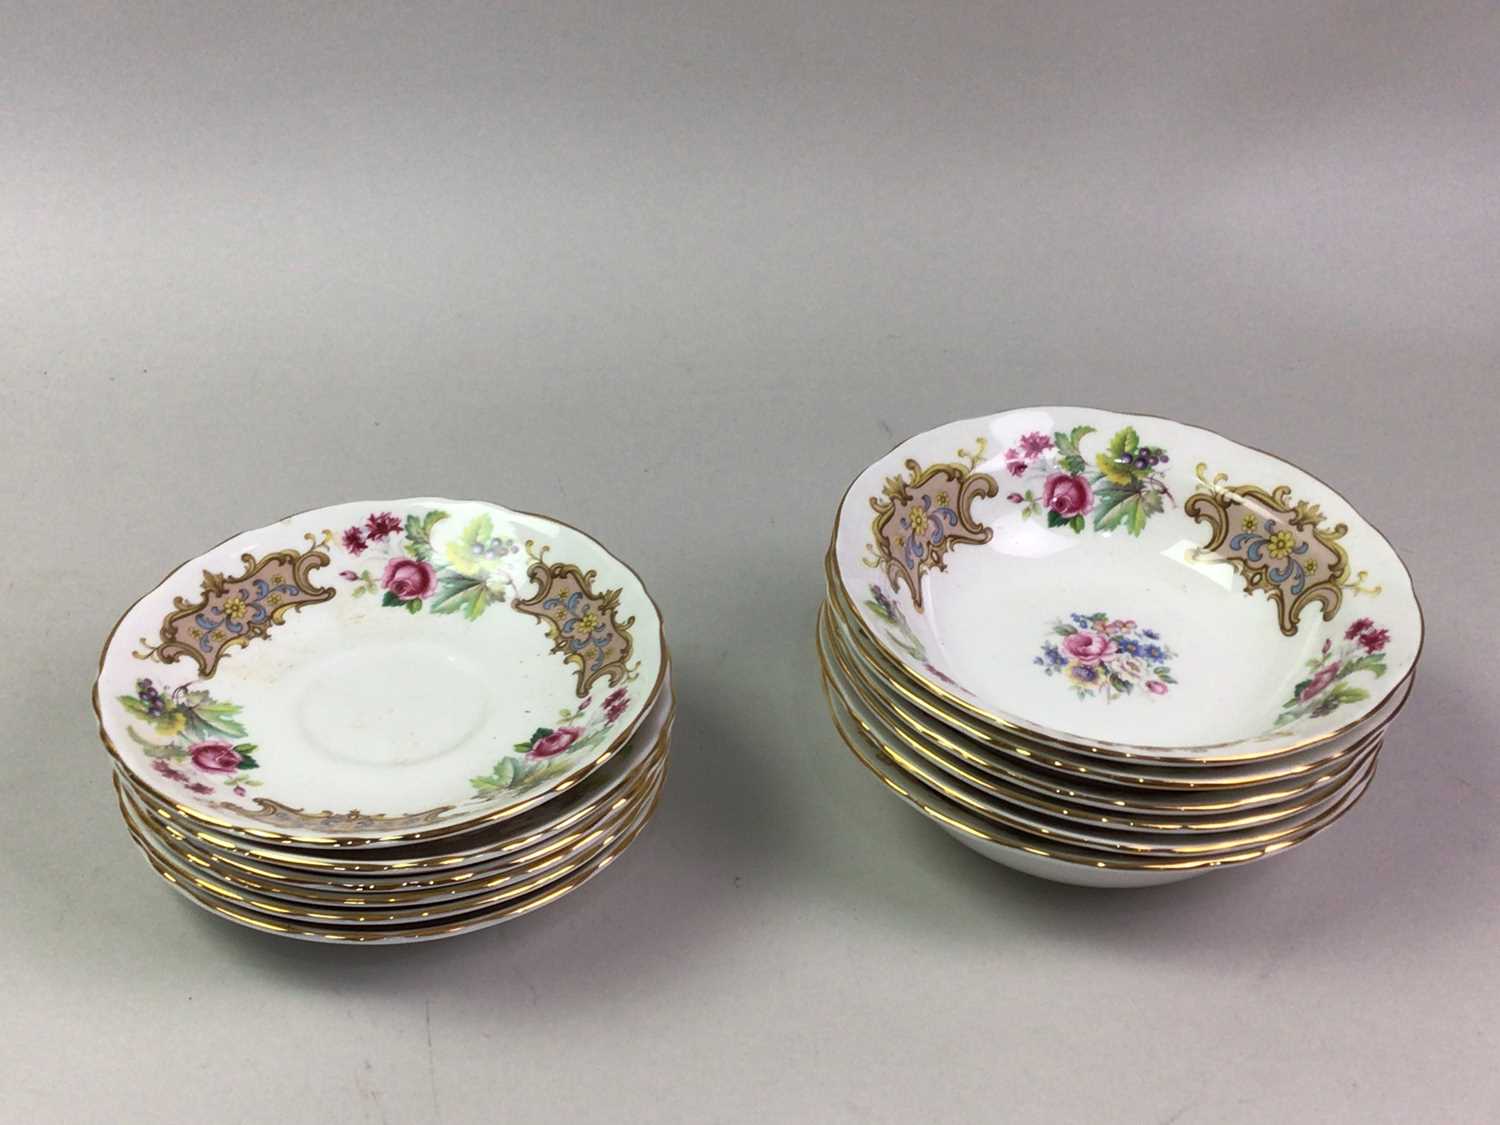 CROWN STAFFORDSHIRE PART DINNER SERVICE TRANSFER DECORATED WITH FLOWERS AND SCROLL PANELS - Image 4 of 4